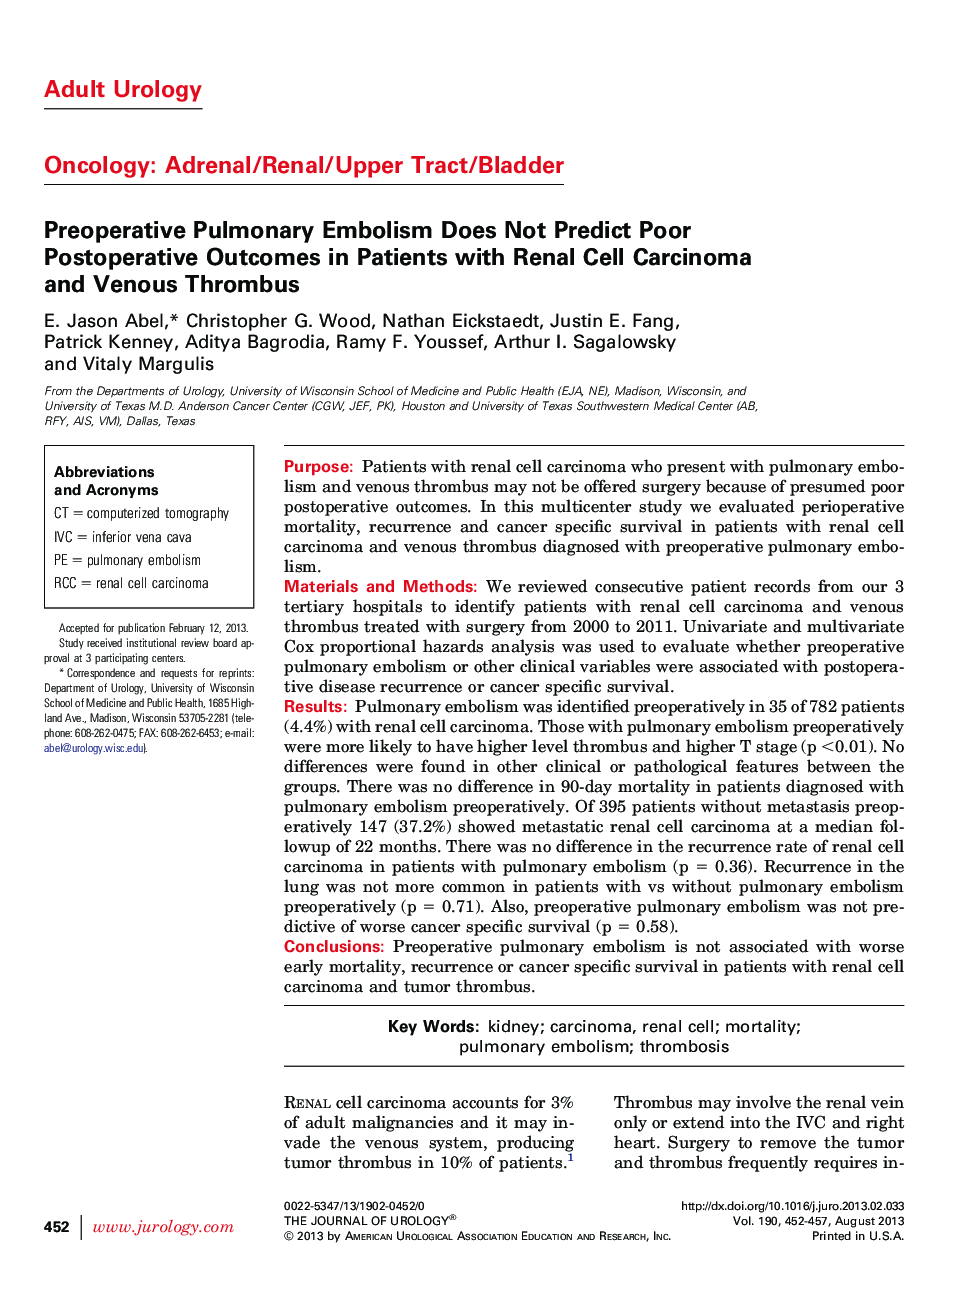 Preoperative Pulmonary Embolism Does Not Predict Poor Postoperative Outcomes in Patients with Renal Cell Carcinoma and Venous Thrombus 